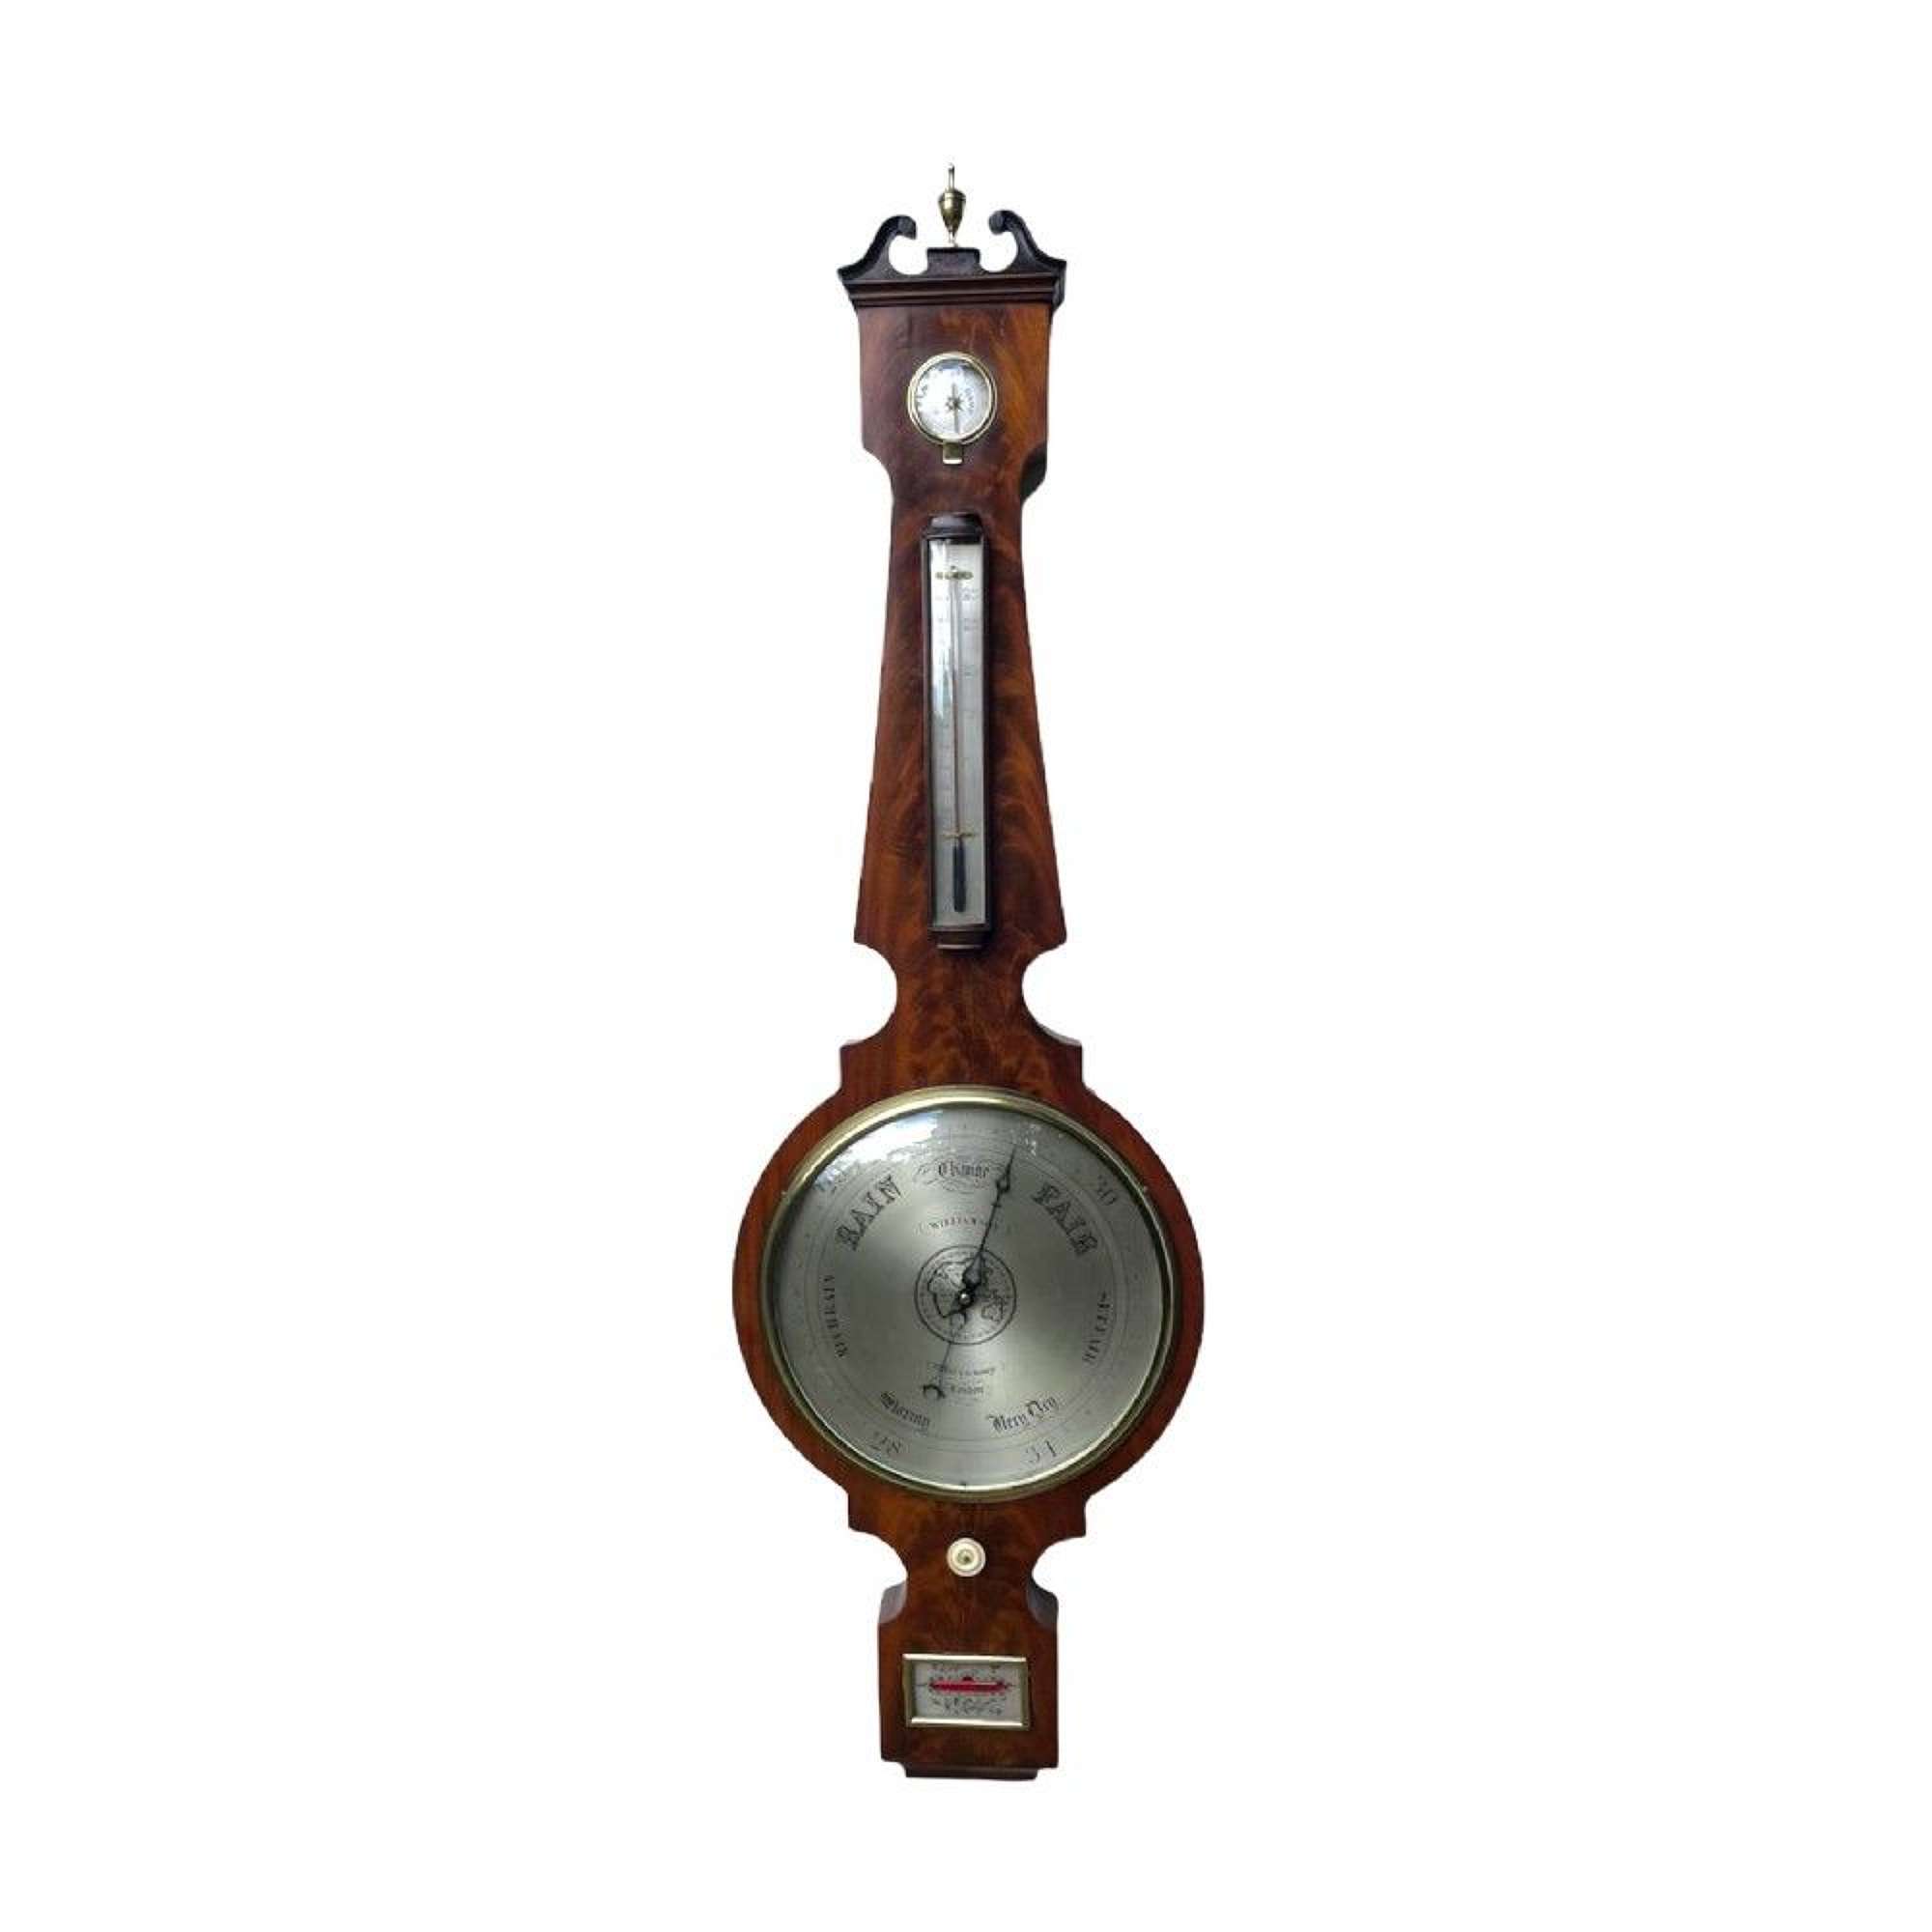 Outstanding Quality Antique 18th Century George Iii Oversized Banjo Barometer